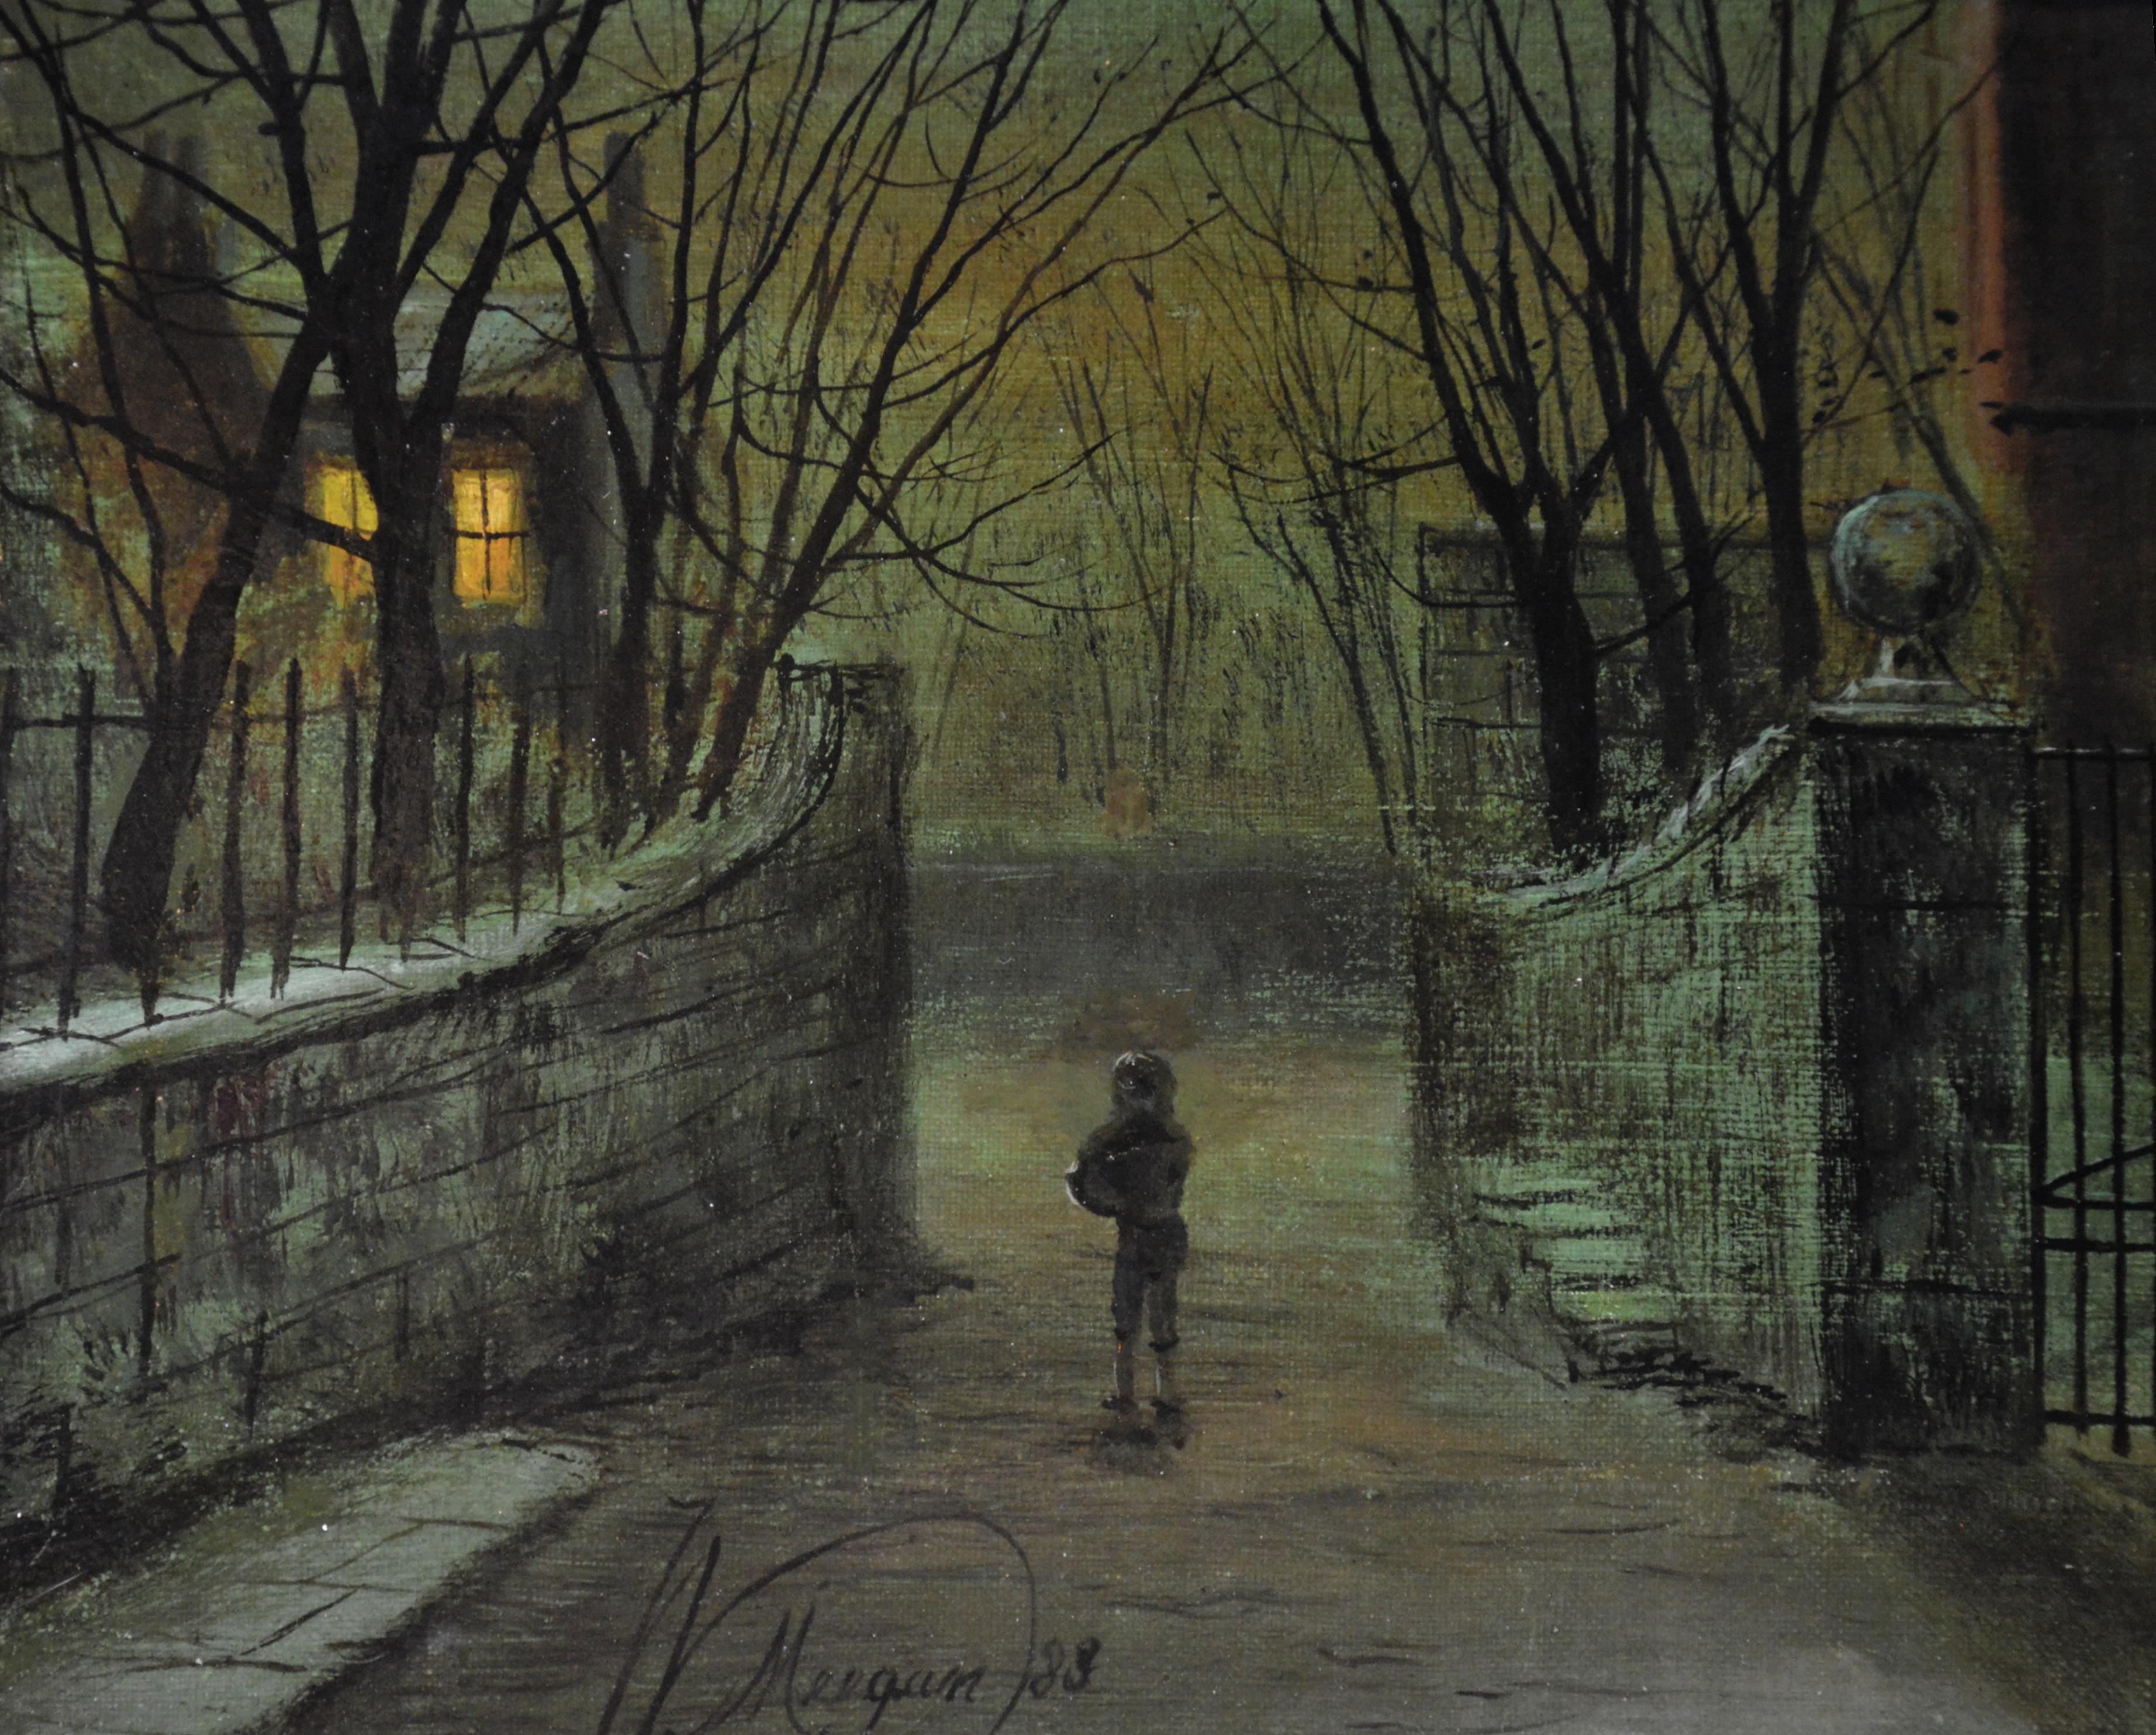 By Moonlight - 19th Century Oil Painting of Victorian Street - Atkinson Grimshaw - Black Landscape Painting by Walter Linsley Meegan